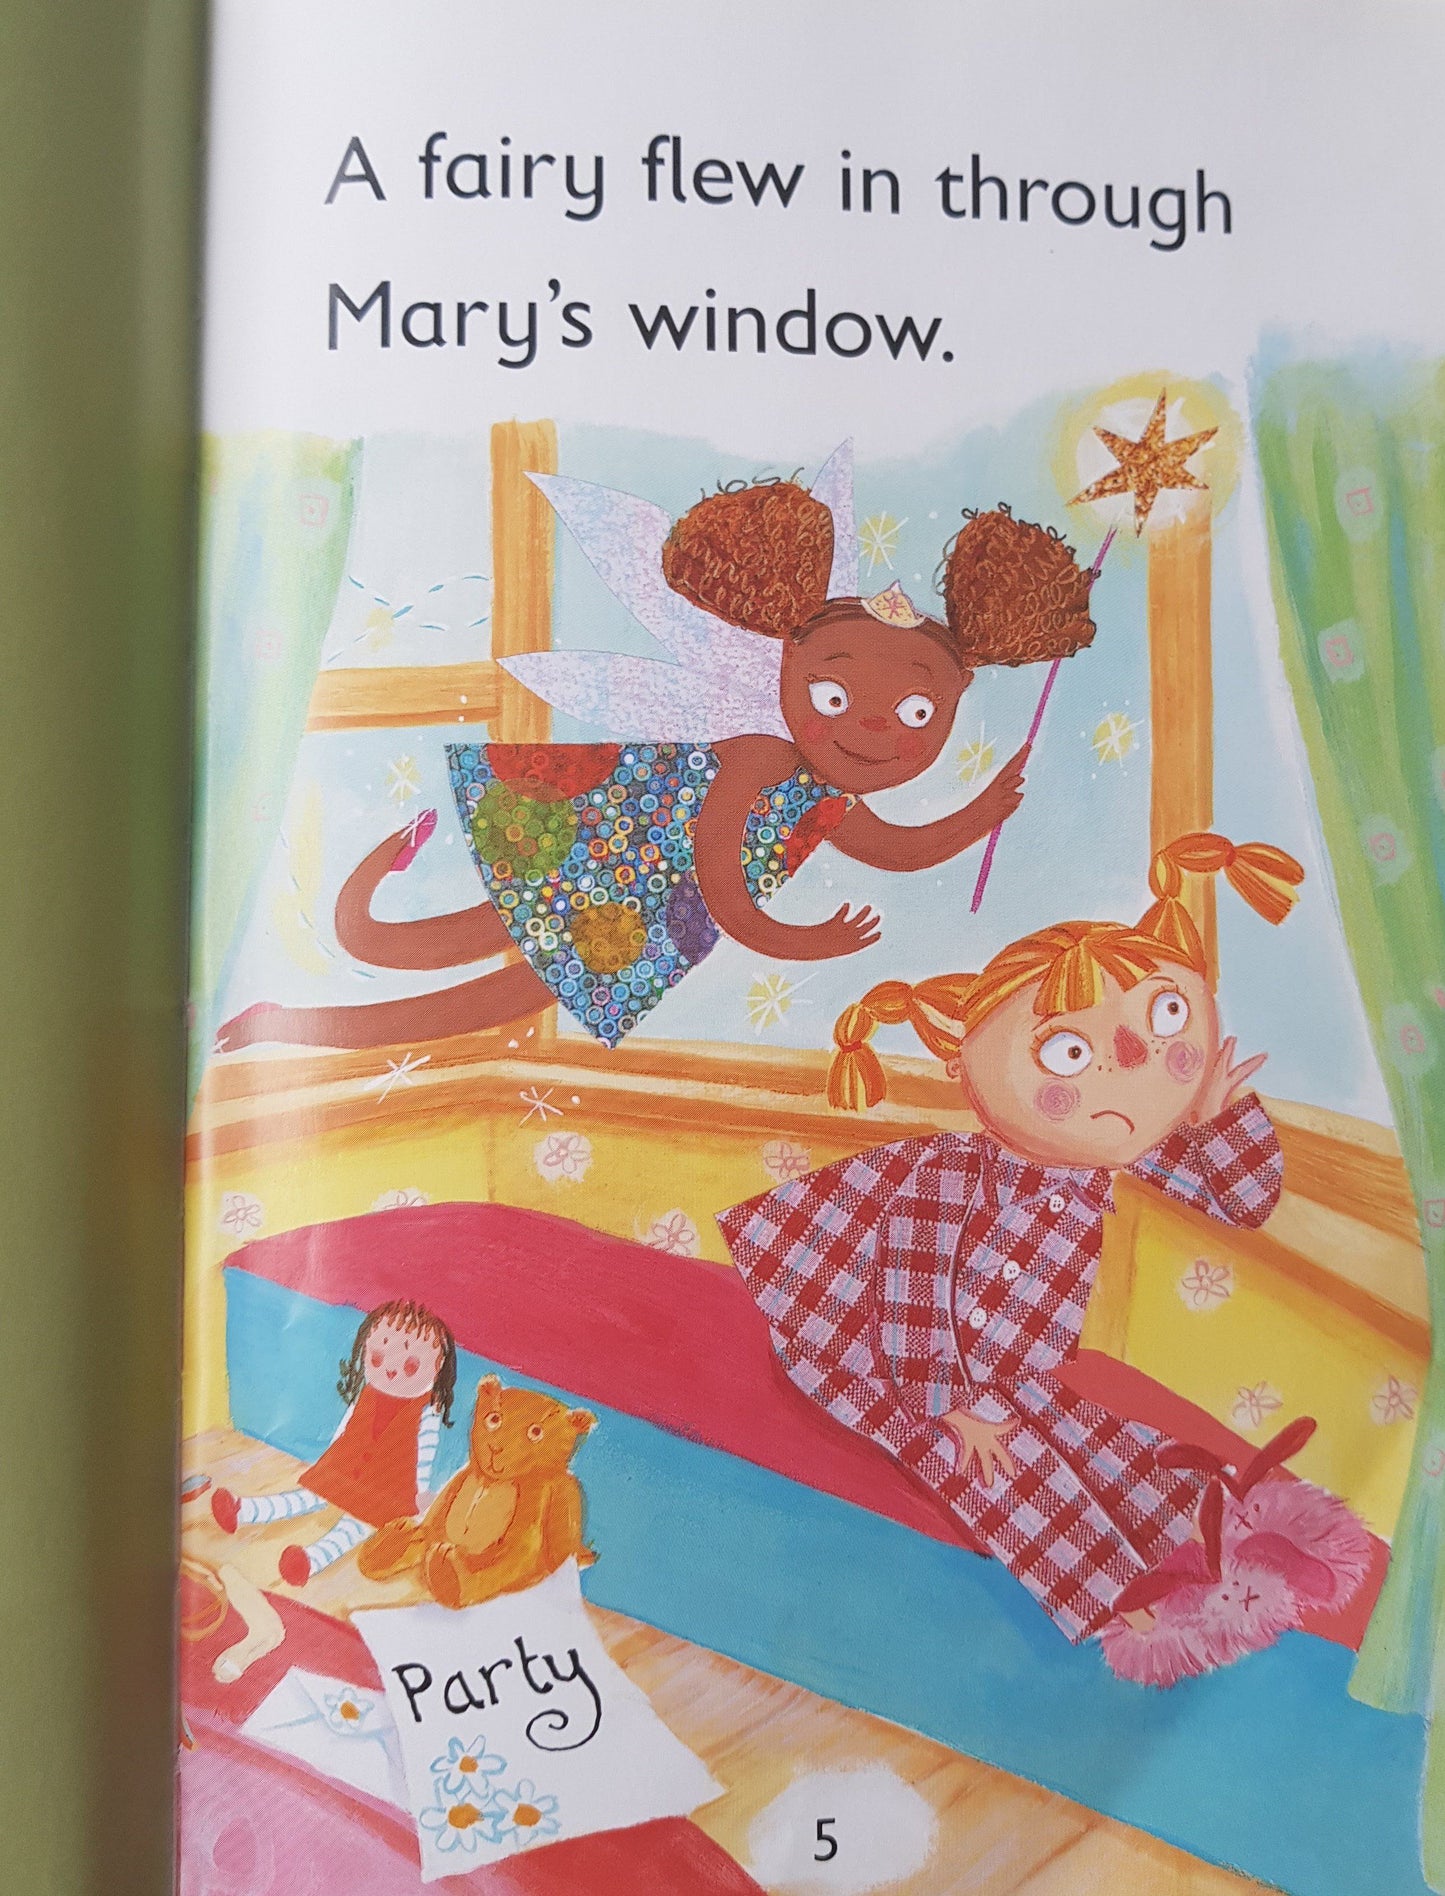 Mary and the Fairy Very Good, 3-5 Yrs Recuddles  (6301226303673)